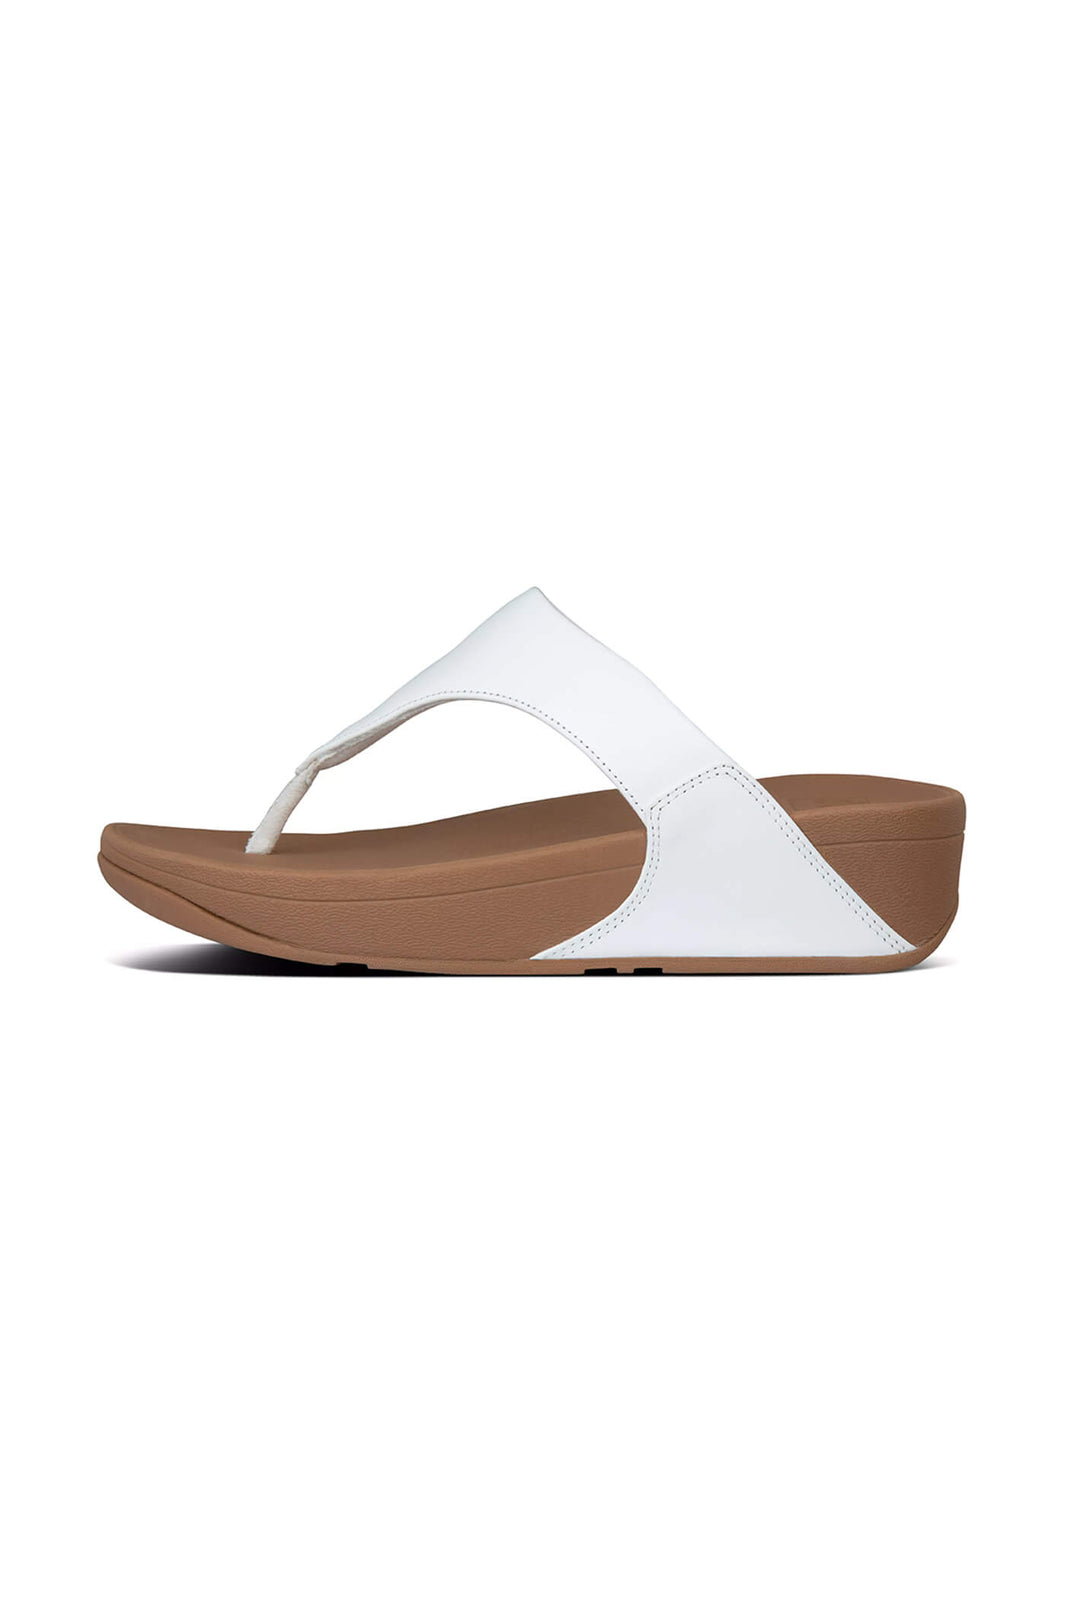 Fitflop Lulu 188-024 White Leather Toepost - Shirley Allum Boutique